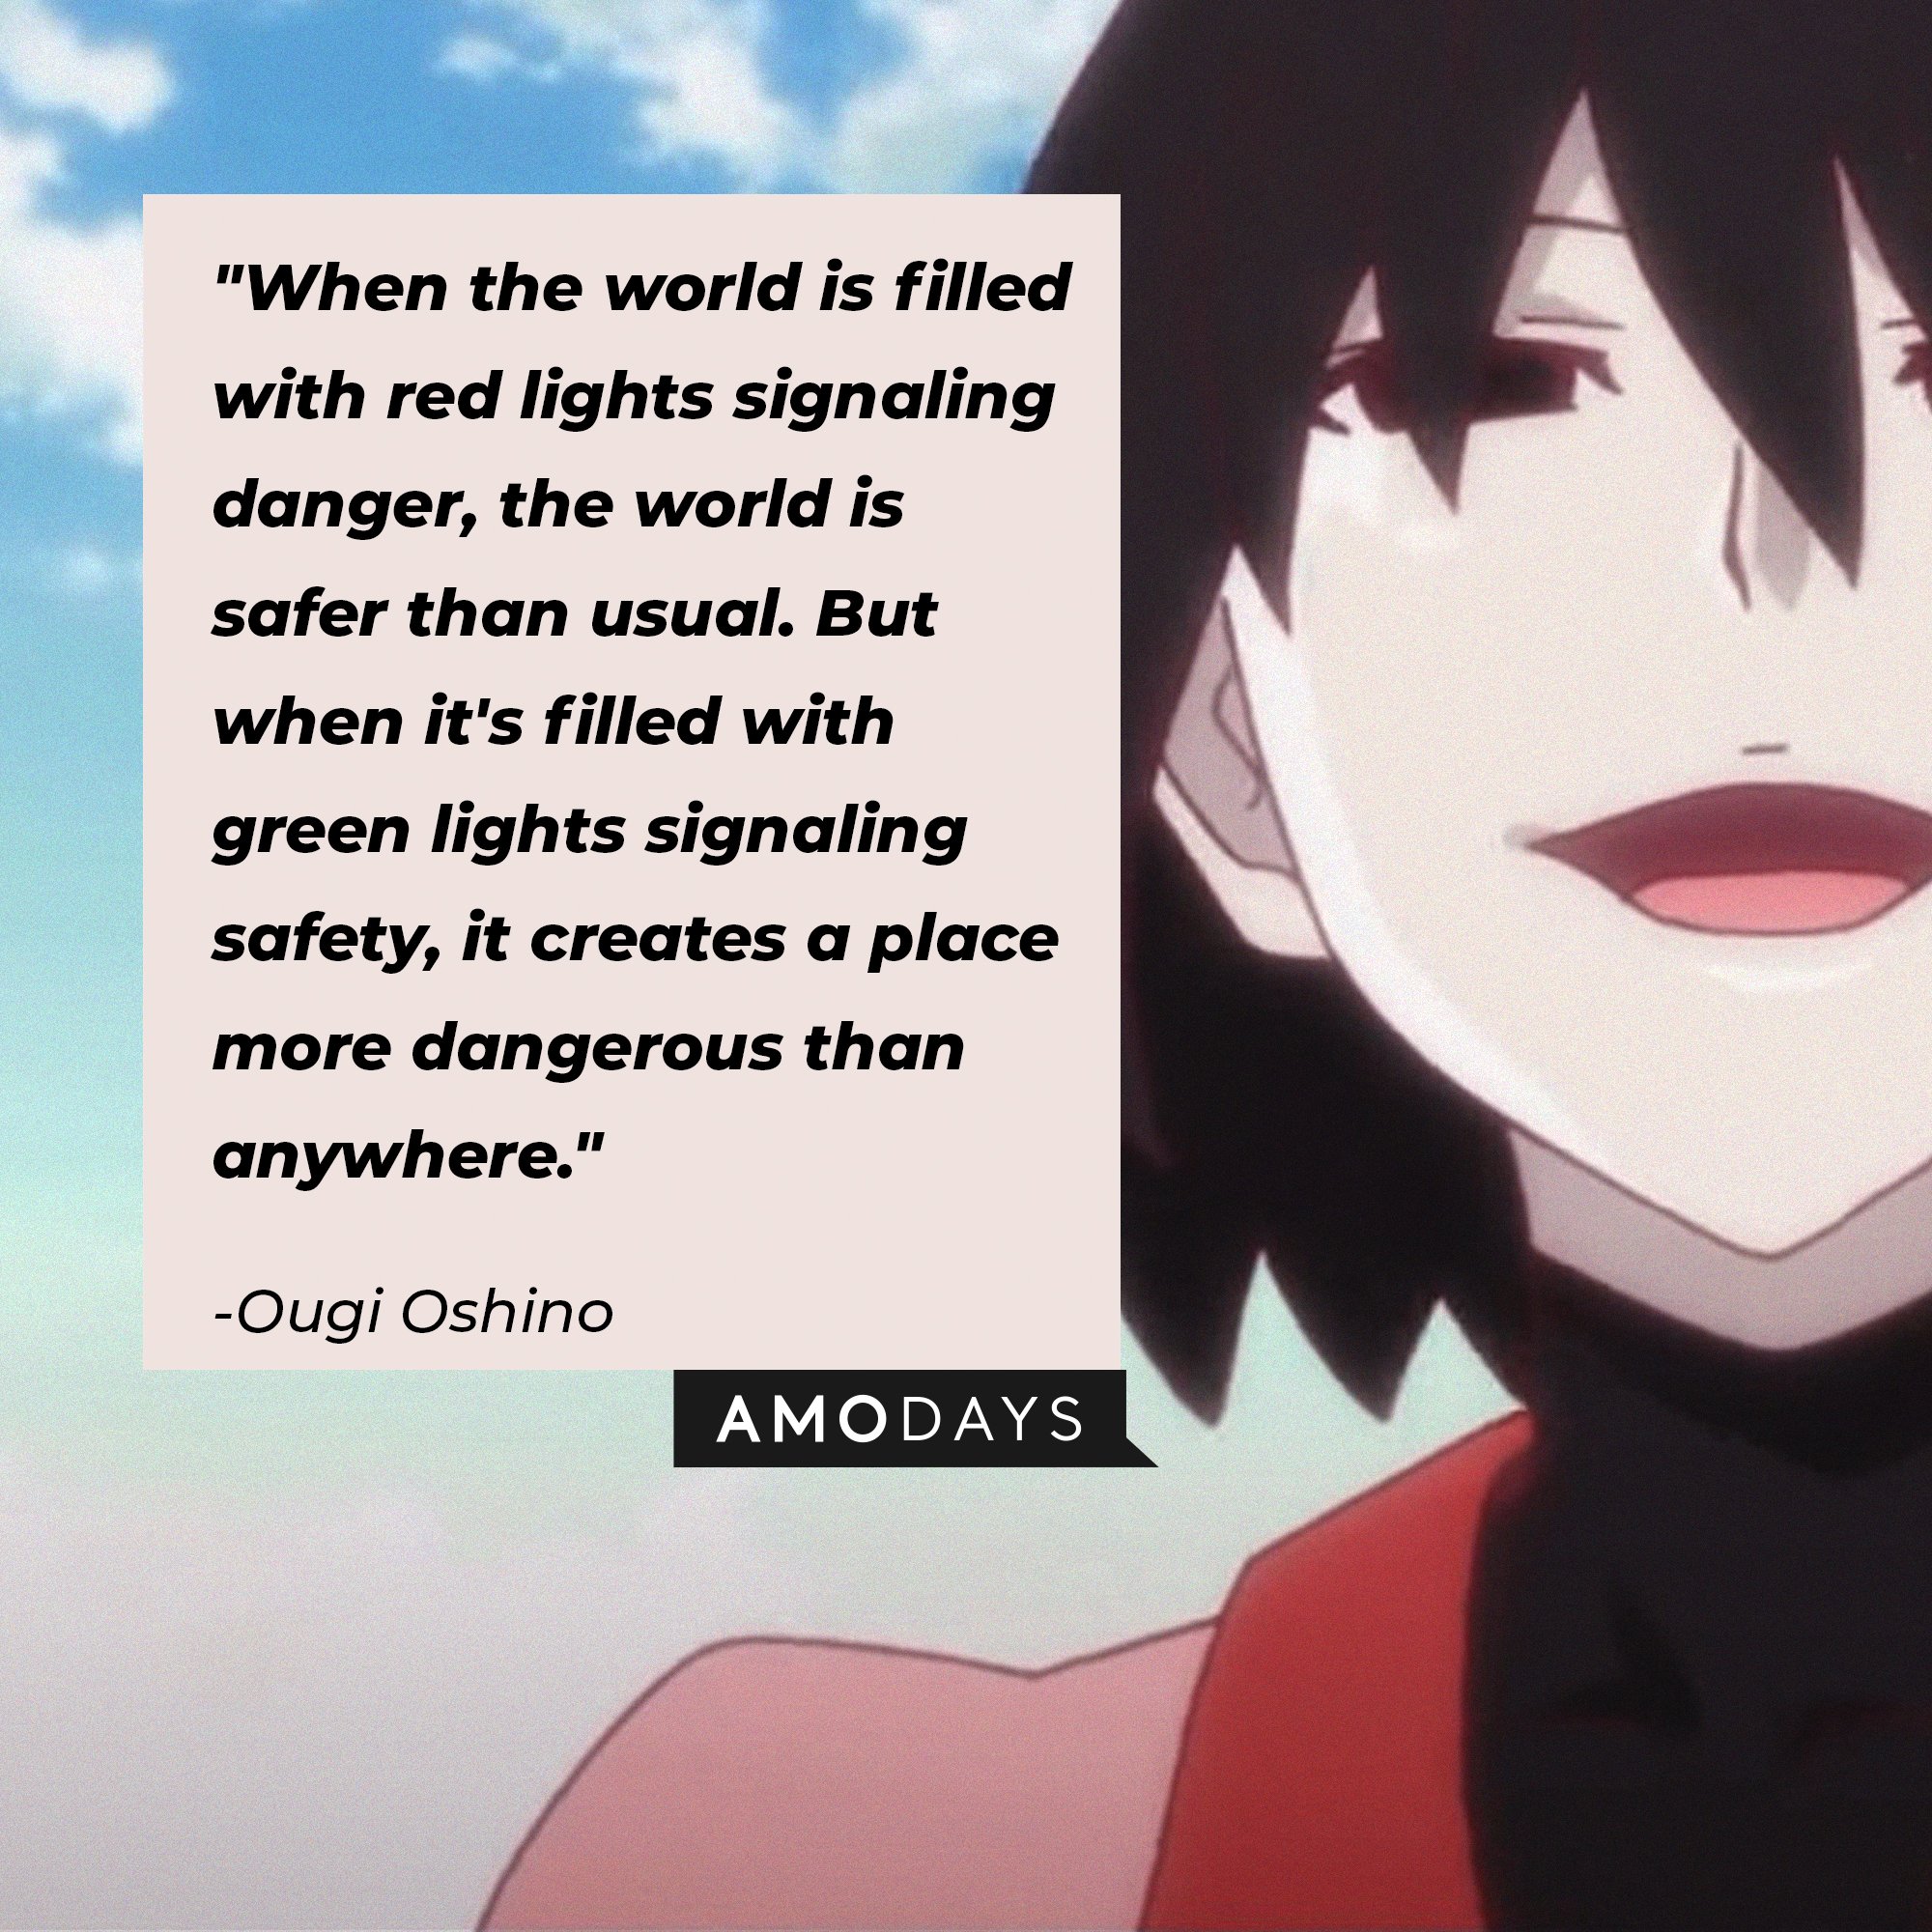 Ougi Oshino’s quote: "When the world is filled with red lights signaling danger, the world is safer than usual. But when it's filled with green lights signaling safety, it creates a place more dangerous than anywhere." | Image: AmoDays 